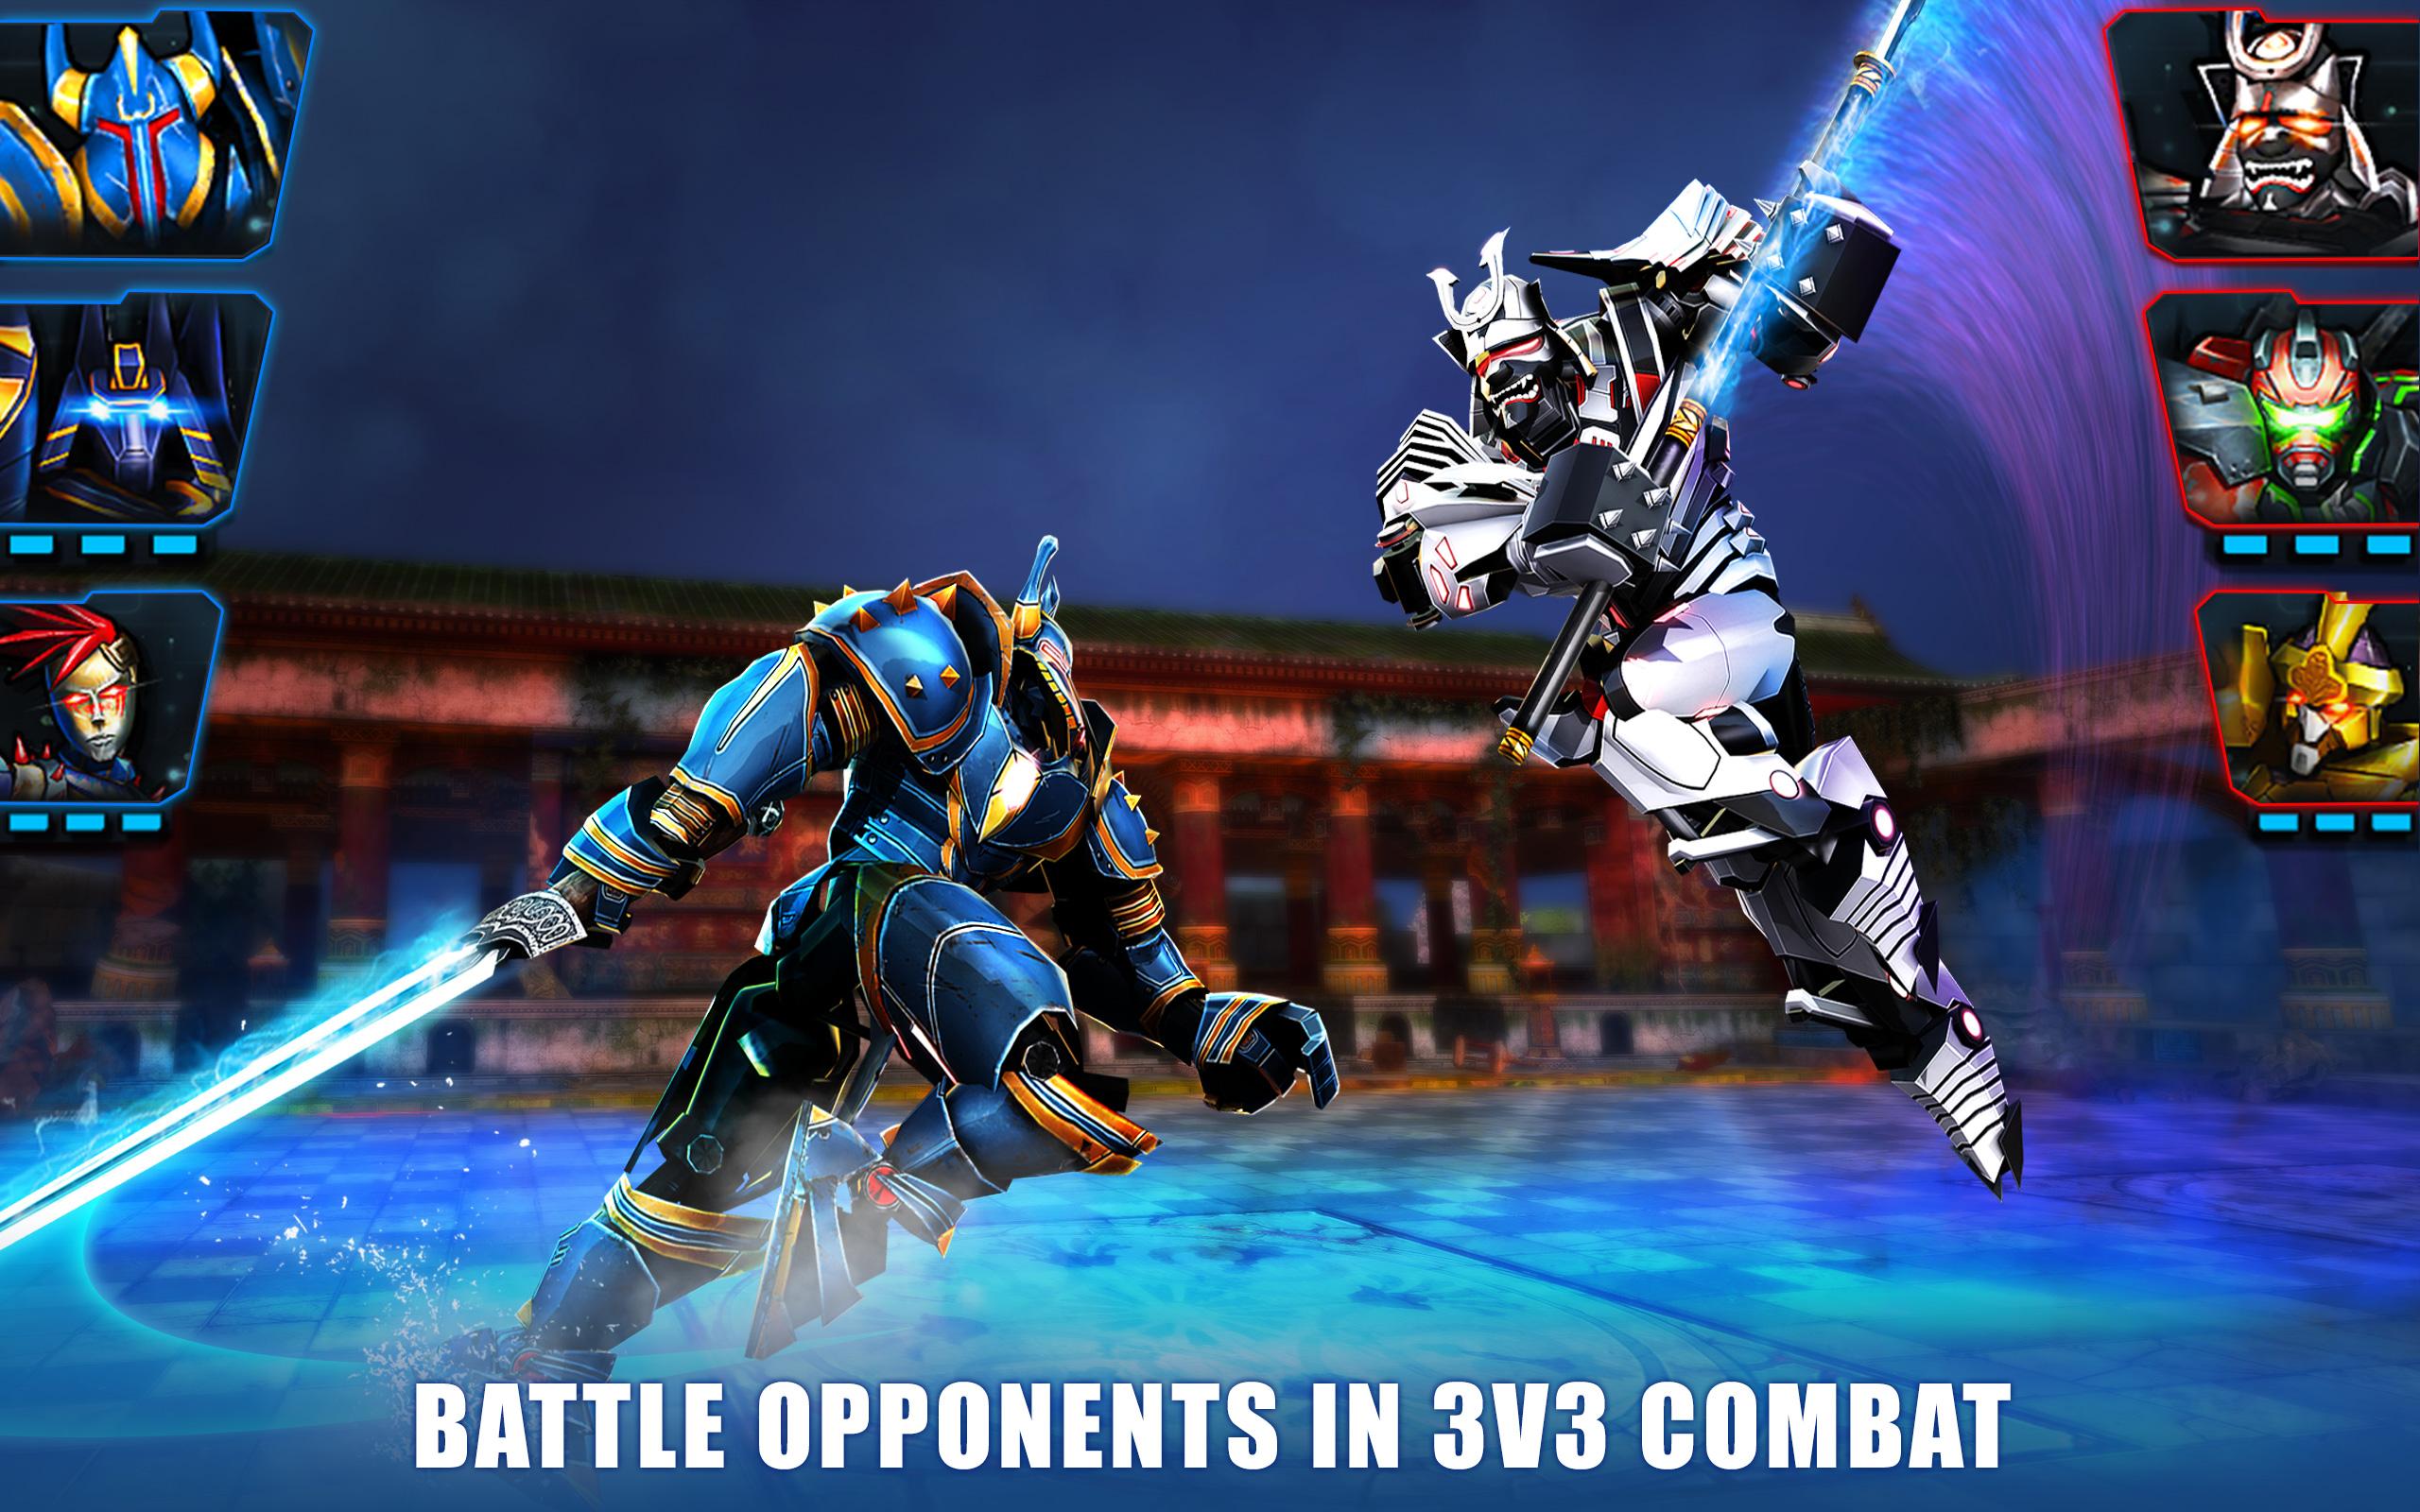 Ultimate Robot Fighting for Android - APK Download - 